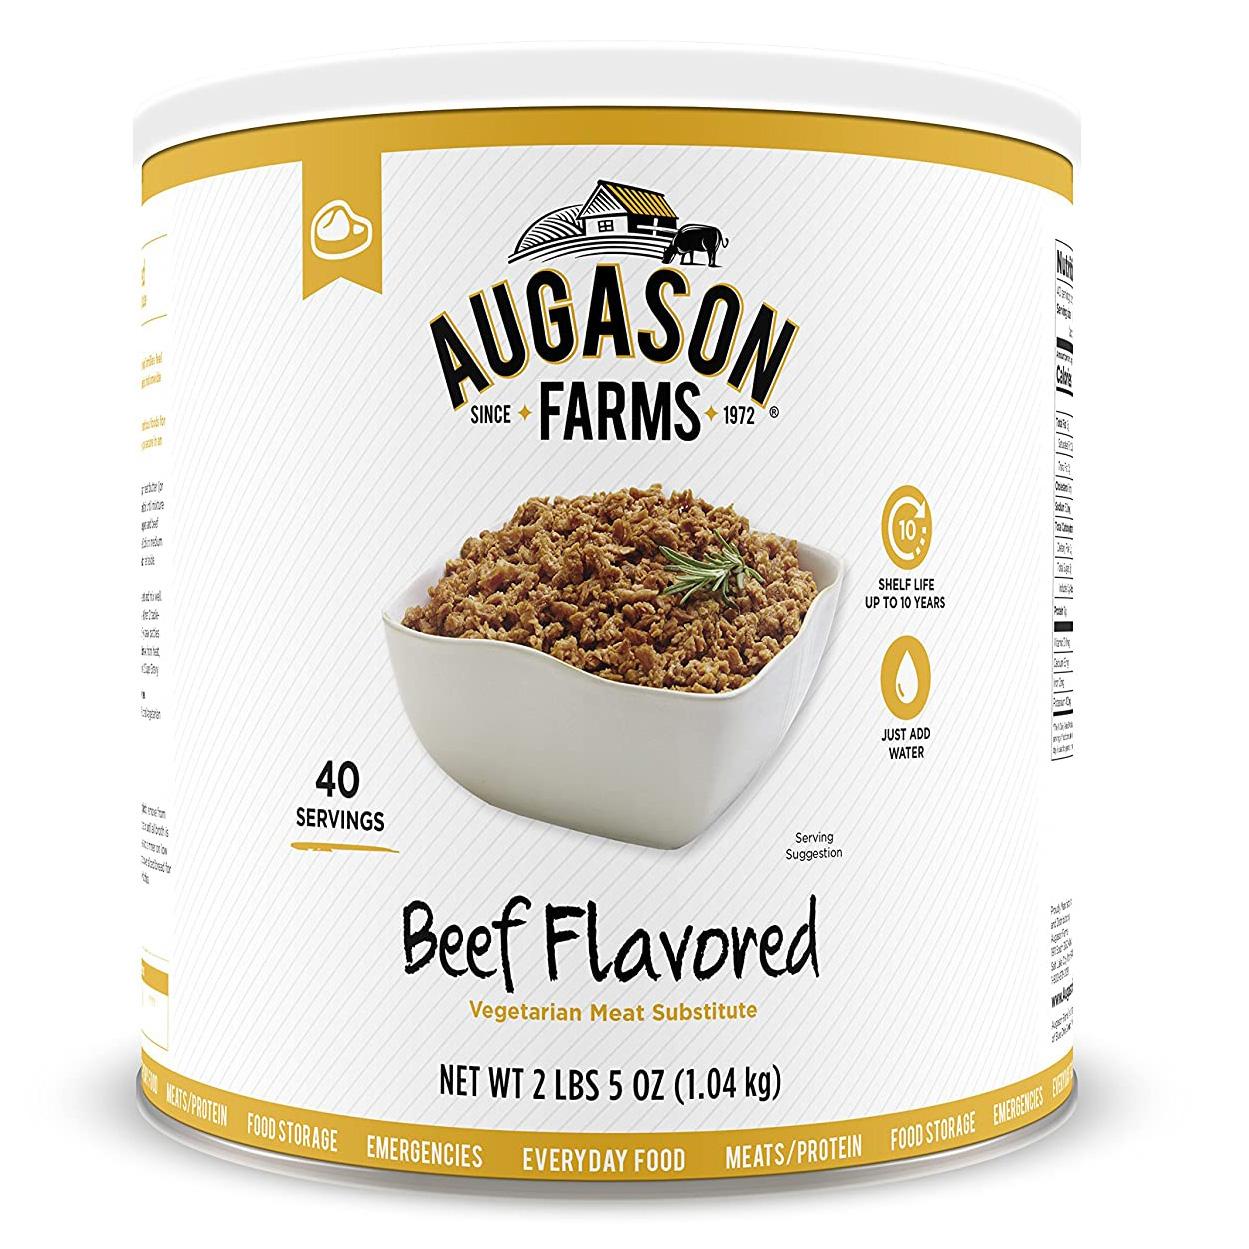 Augason Farms Beef Flavored Vegetarian Meat Substitute for $12.49